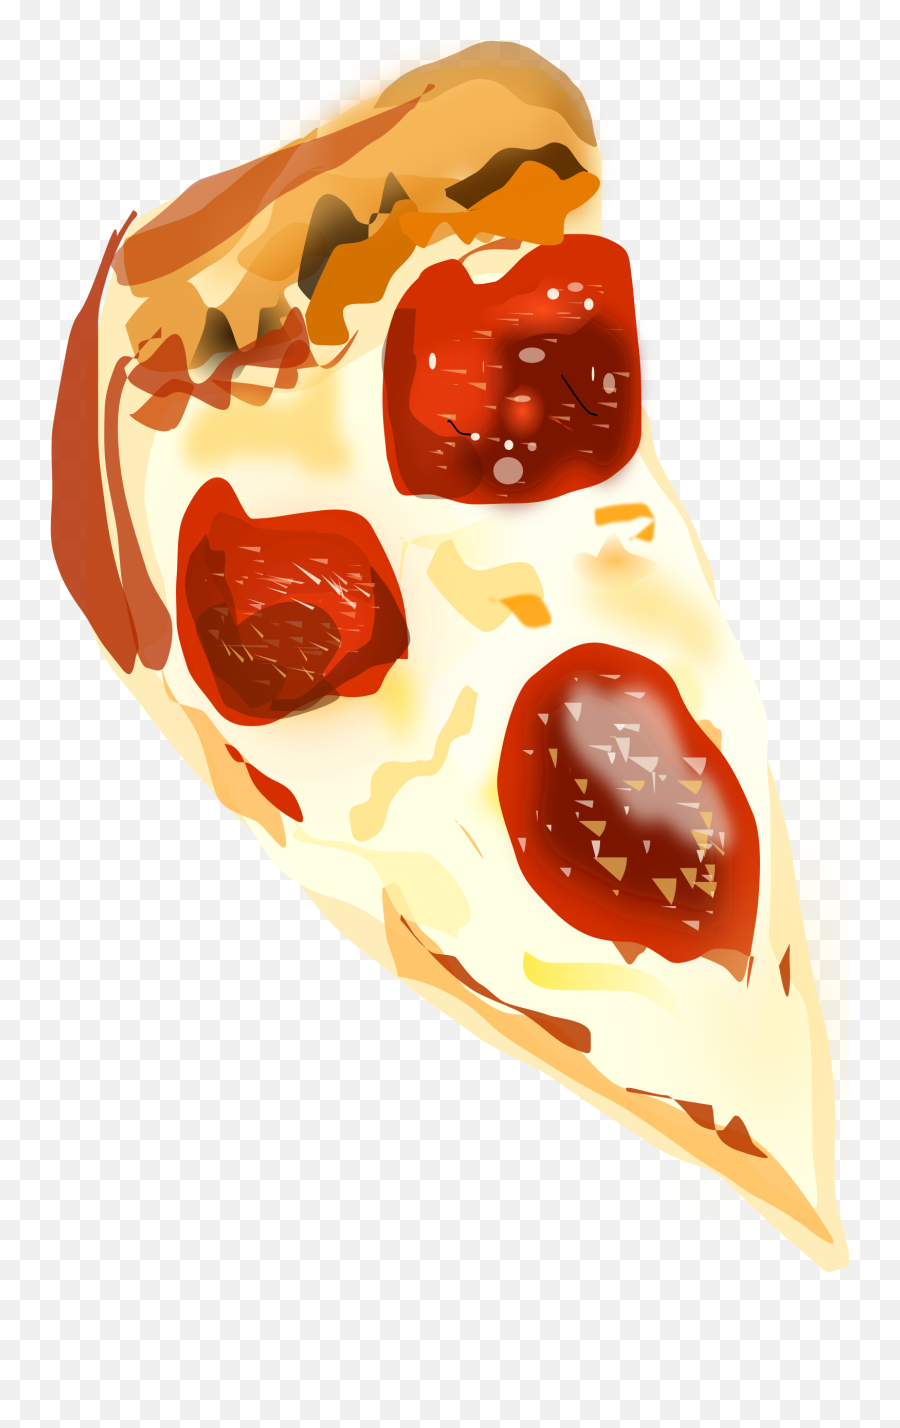 Bedminsternjhostedciviclivecom - Commonresourcesimages Pizza Pic Transparent Background Emoji,Apple Pie Clipart